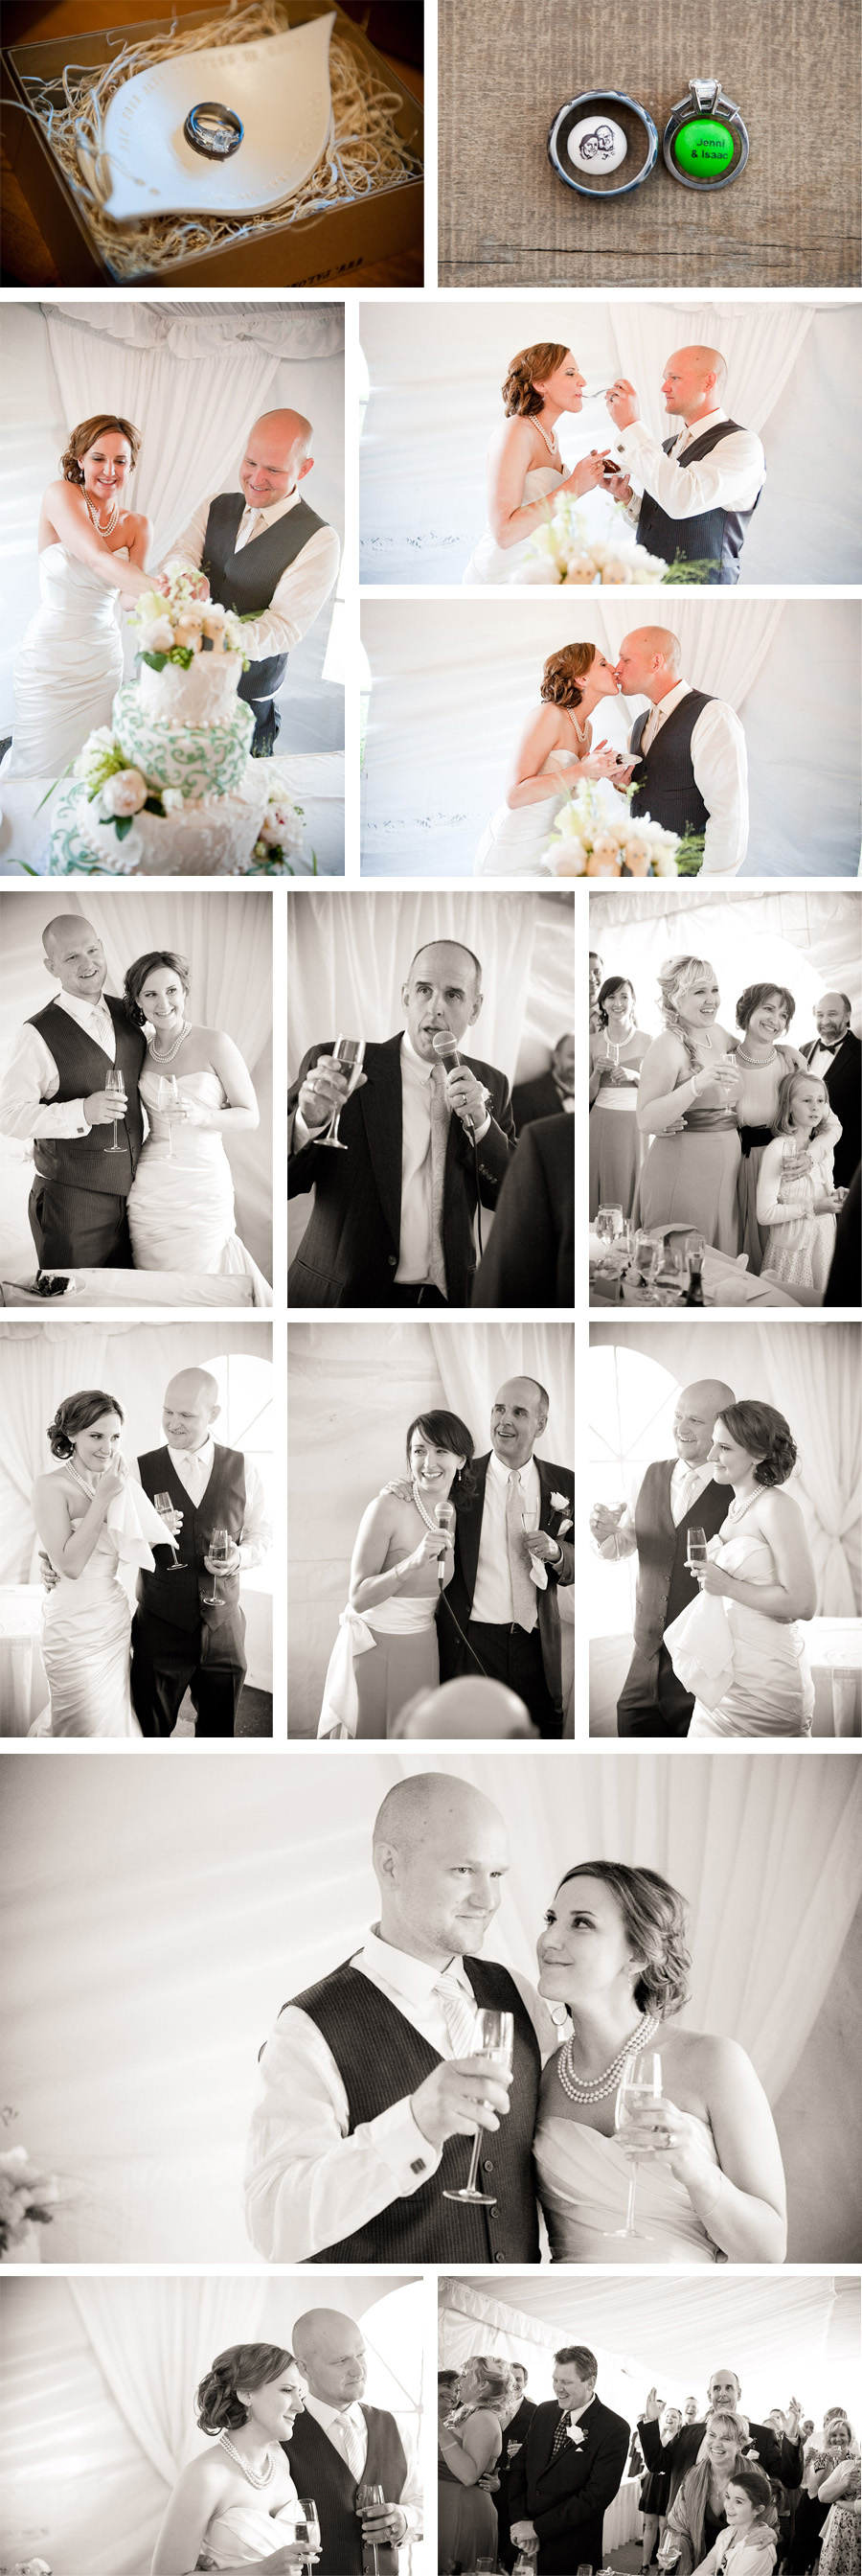 The bride and groom enjoy speeches by guests at their Suncadia Wedding.